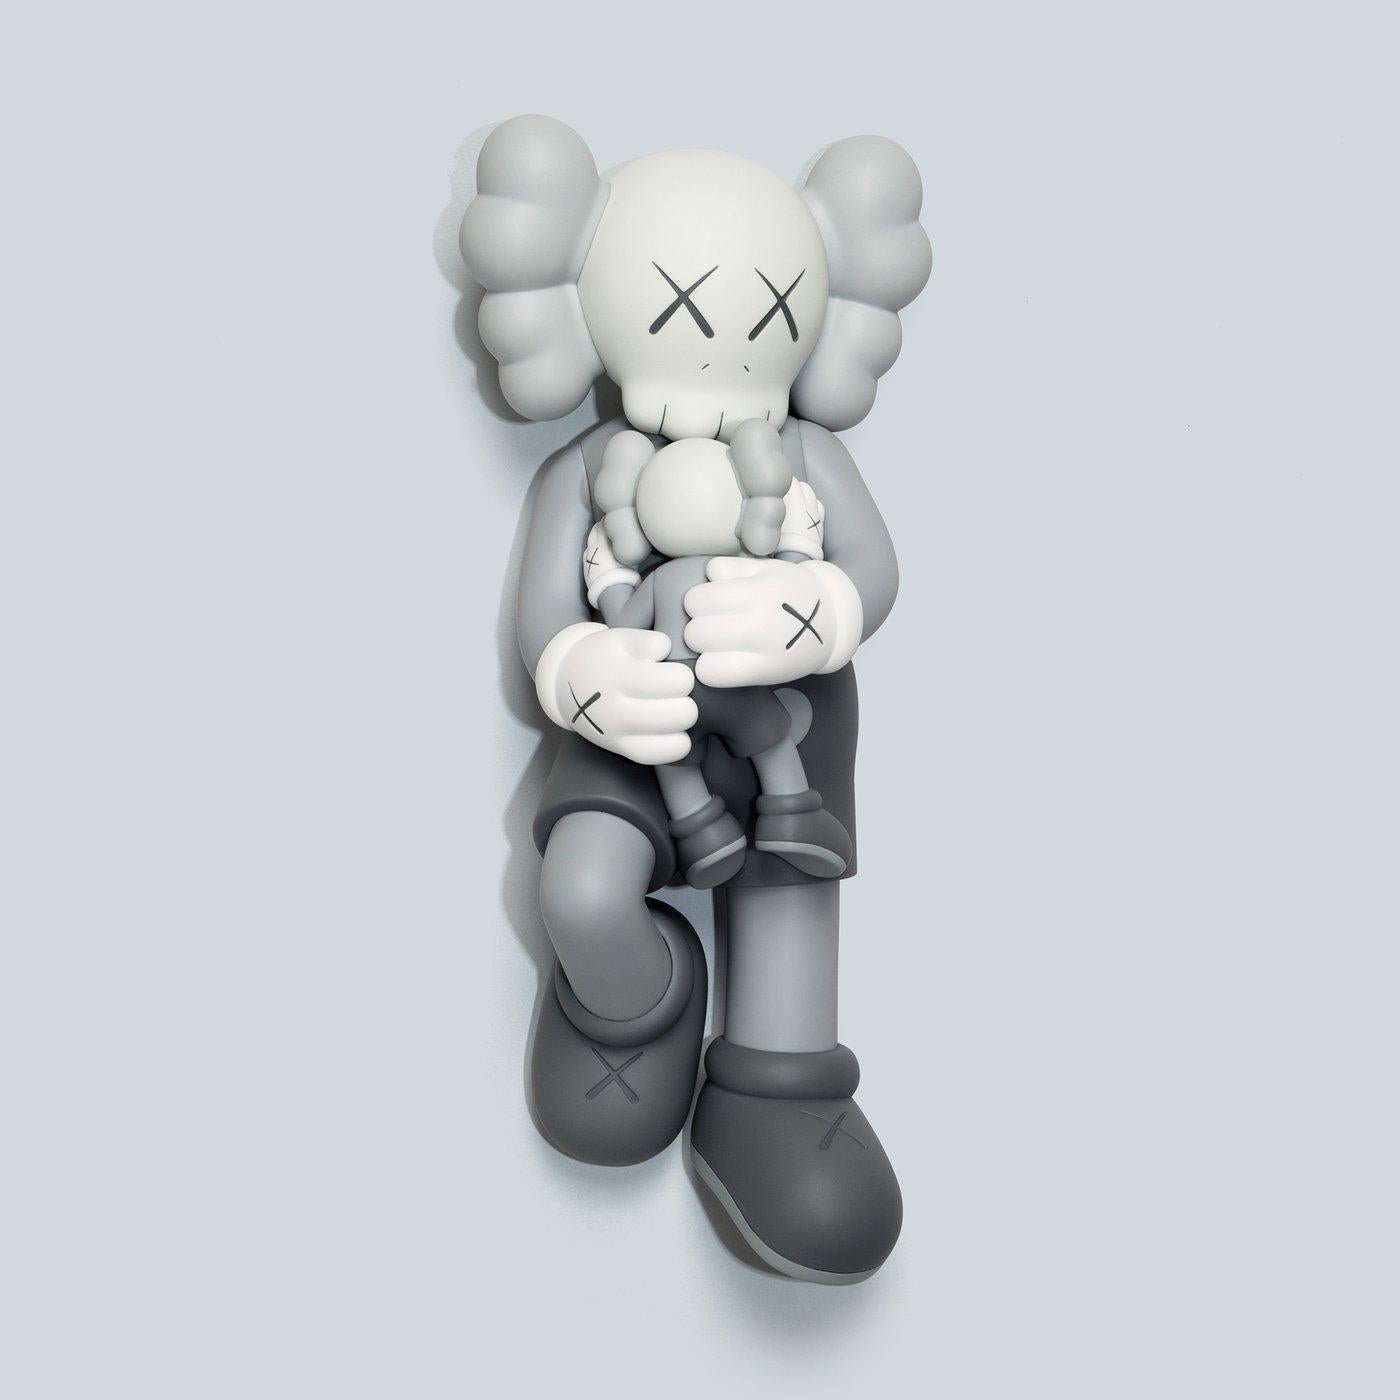 KAWS Grey Holiday Companion (KAWS Singapore): 
This standout KAWS art toy features KAWS' signature character COMPANION in a resting position. Published to commemorate the debut of KAWS’ 42-meter inflatable work of same along Singapore's Marina Bay